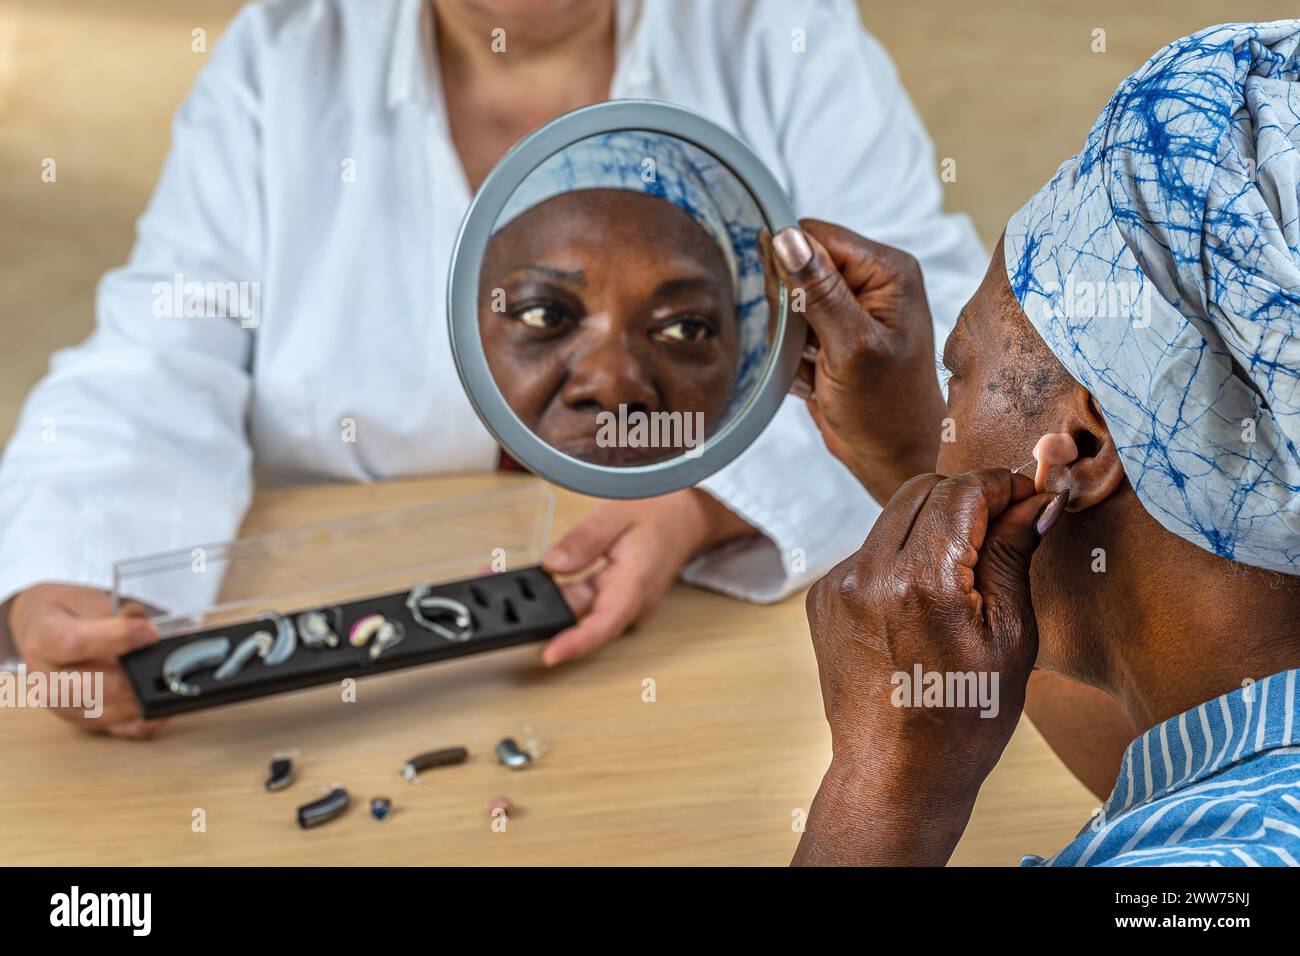 Patient trying different types of hearing aids. Stock Photo